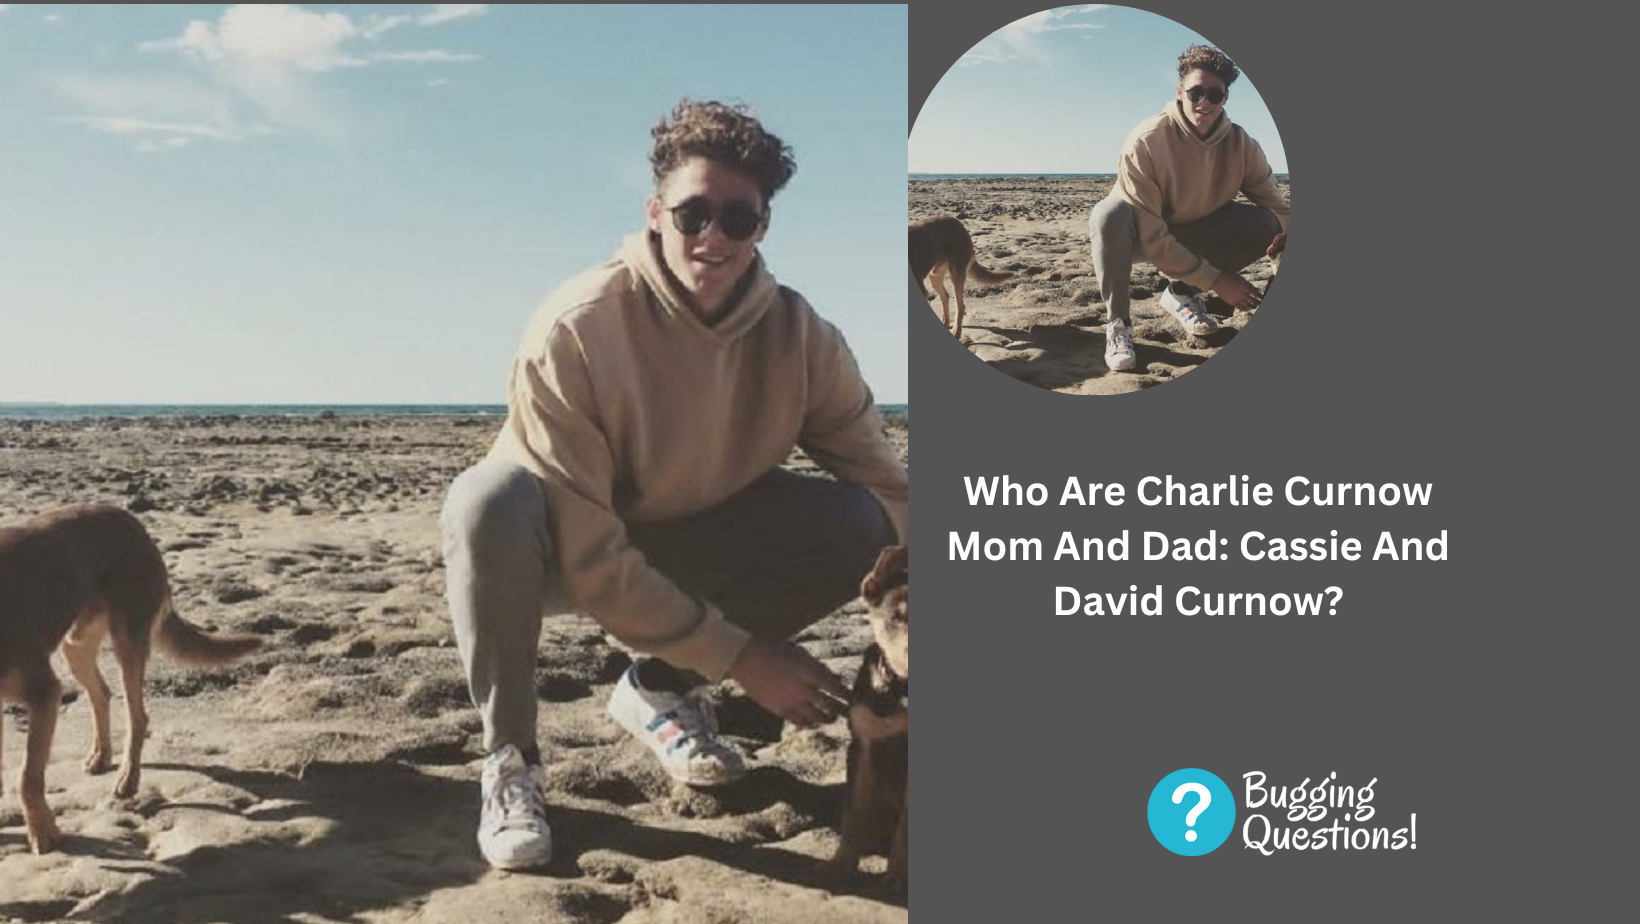 Who Are Charlie Curnow Mom And Dad: Cassie And David Curnow?